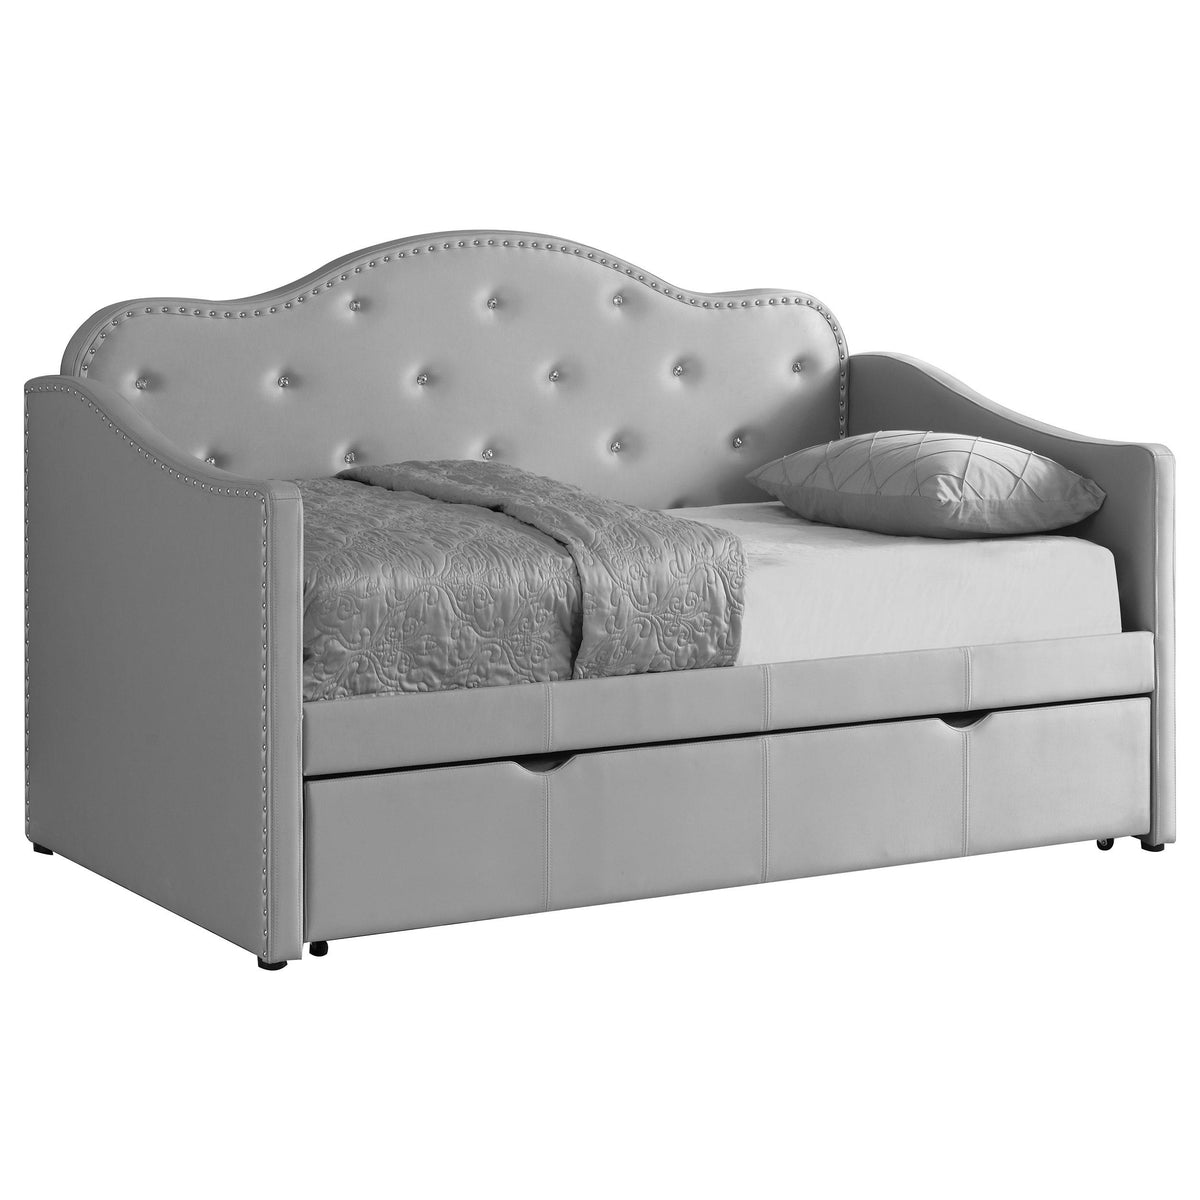 Elmore Upholstered Twin Daybed with Trundle Pearlescent Grey Elmore Upholstered Twin Daybed with Trundle Pearlescent Grey 